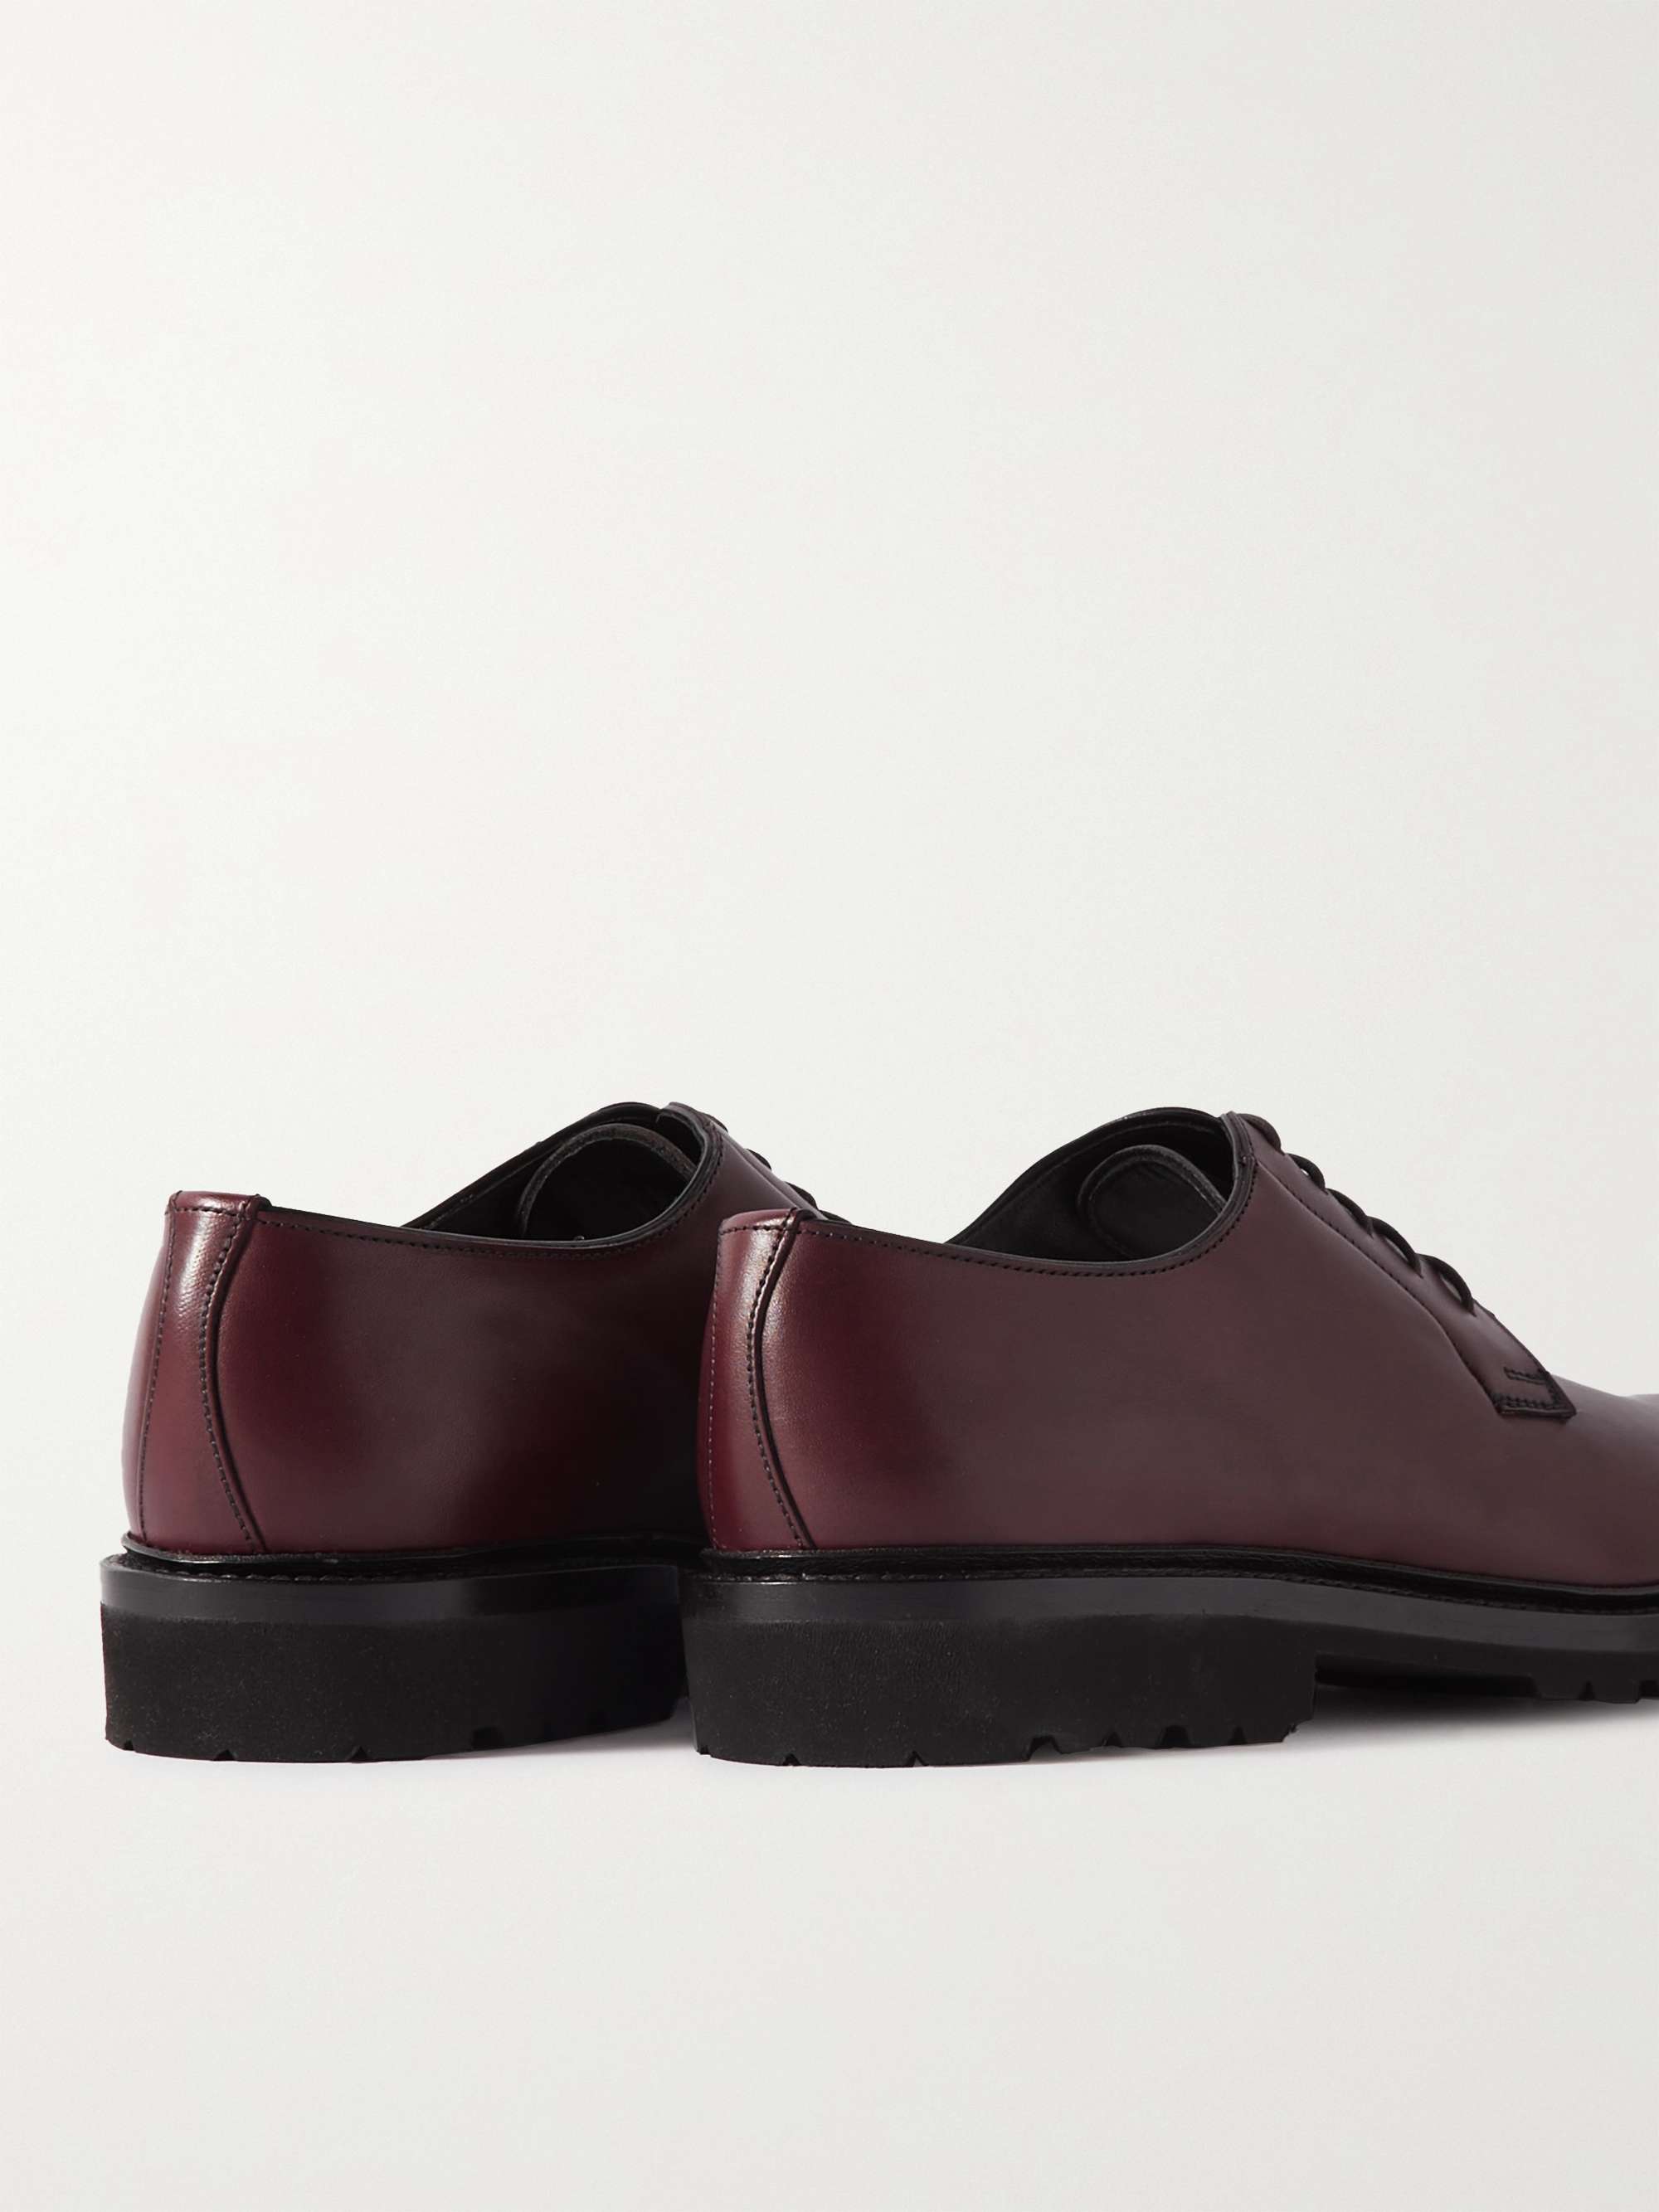 GEORGE CLEVERLEY Archie Leather Derby Shoes | MR PORTER